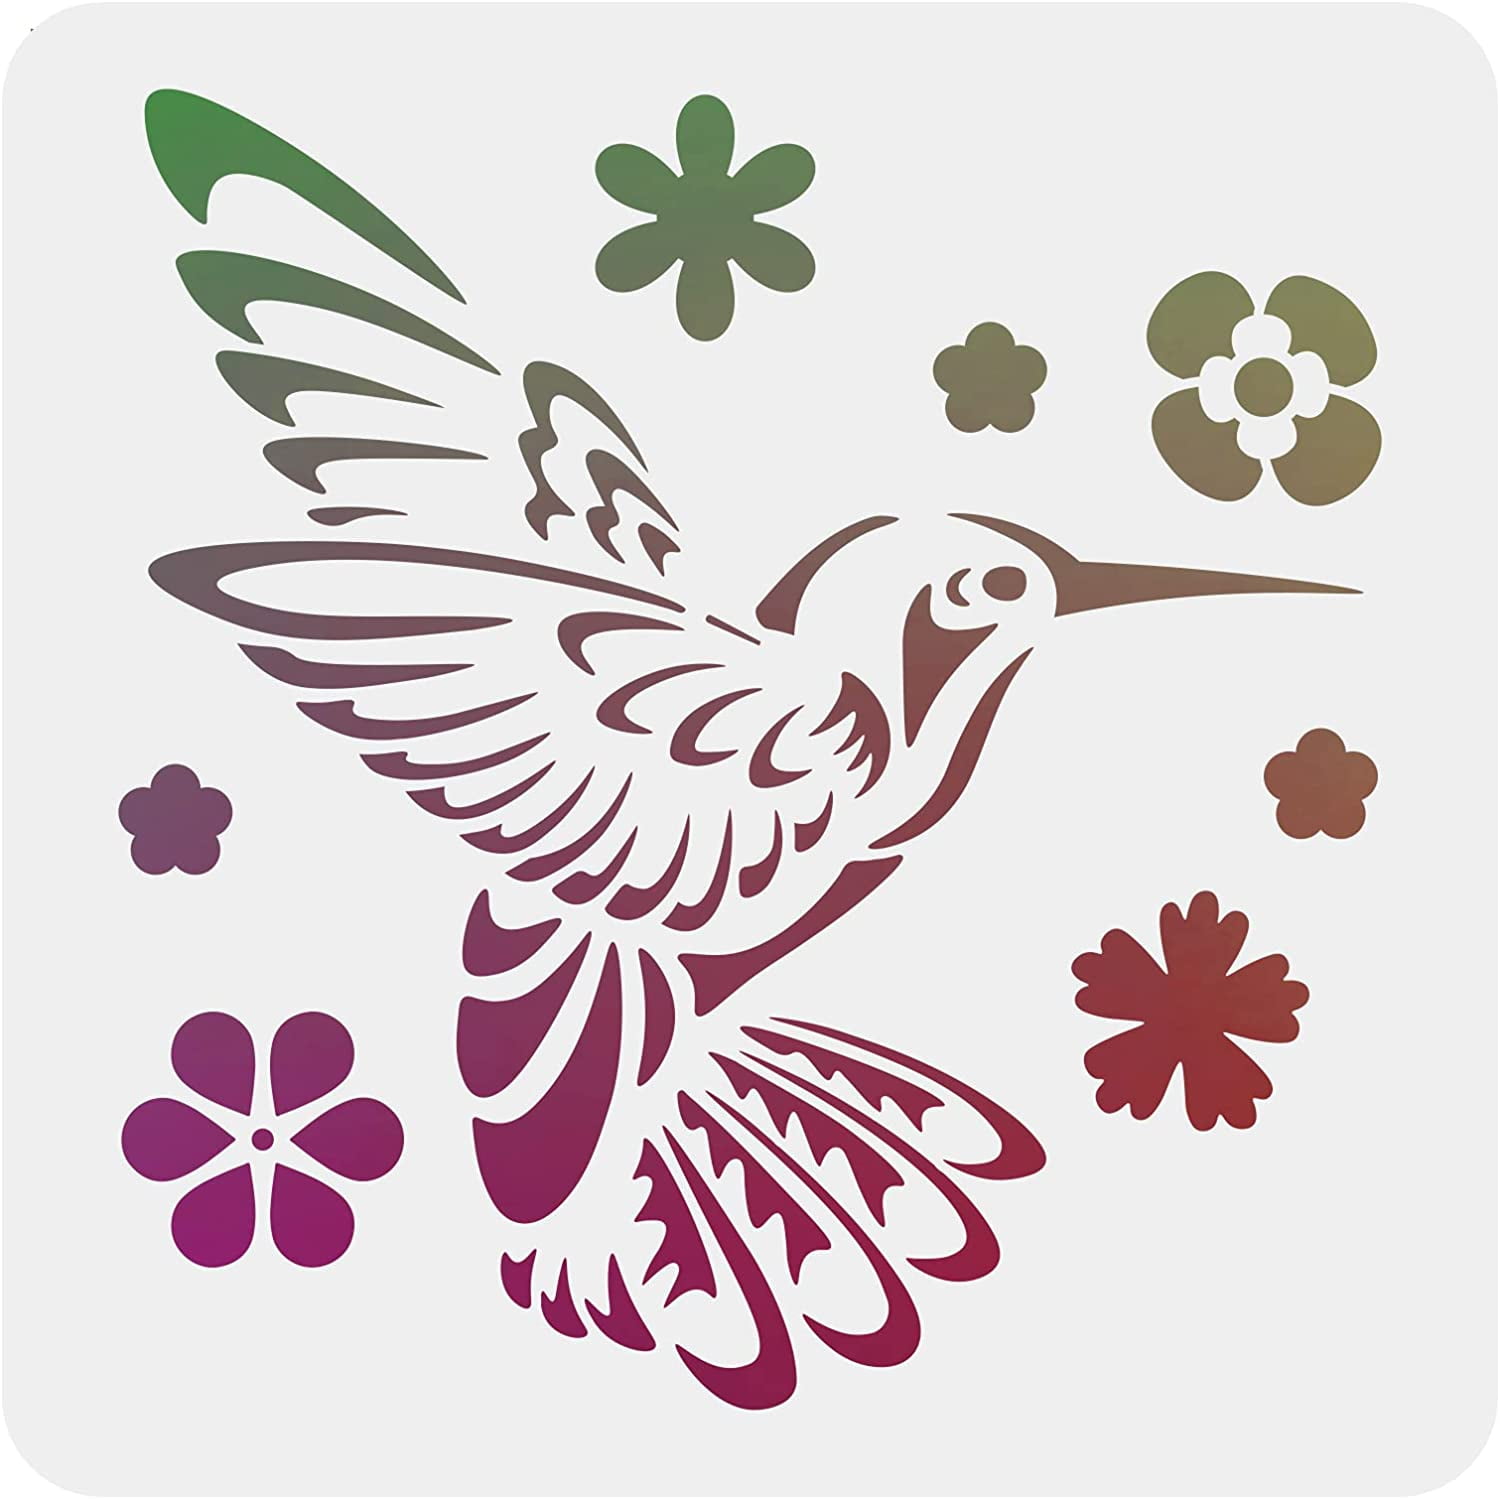 Bird Pattern Plastic Painting Stencils Templates Square Bird and Garland  Drawing Reusable Stencil for Paint Craft Wall DIY Home Decor Wood Draw